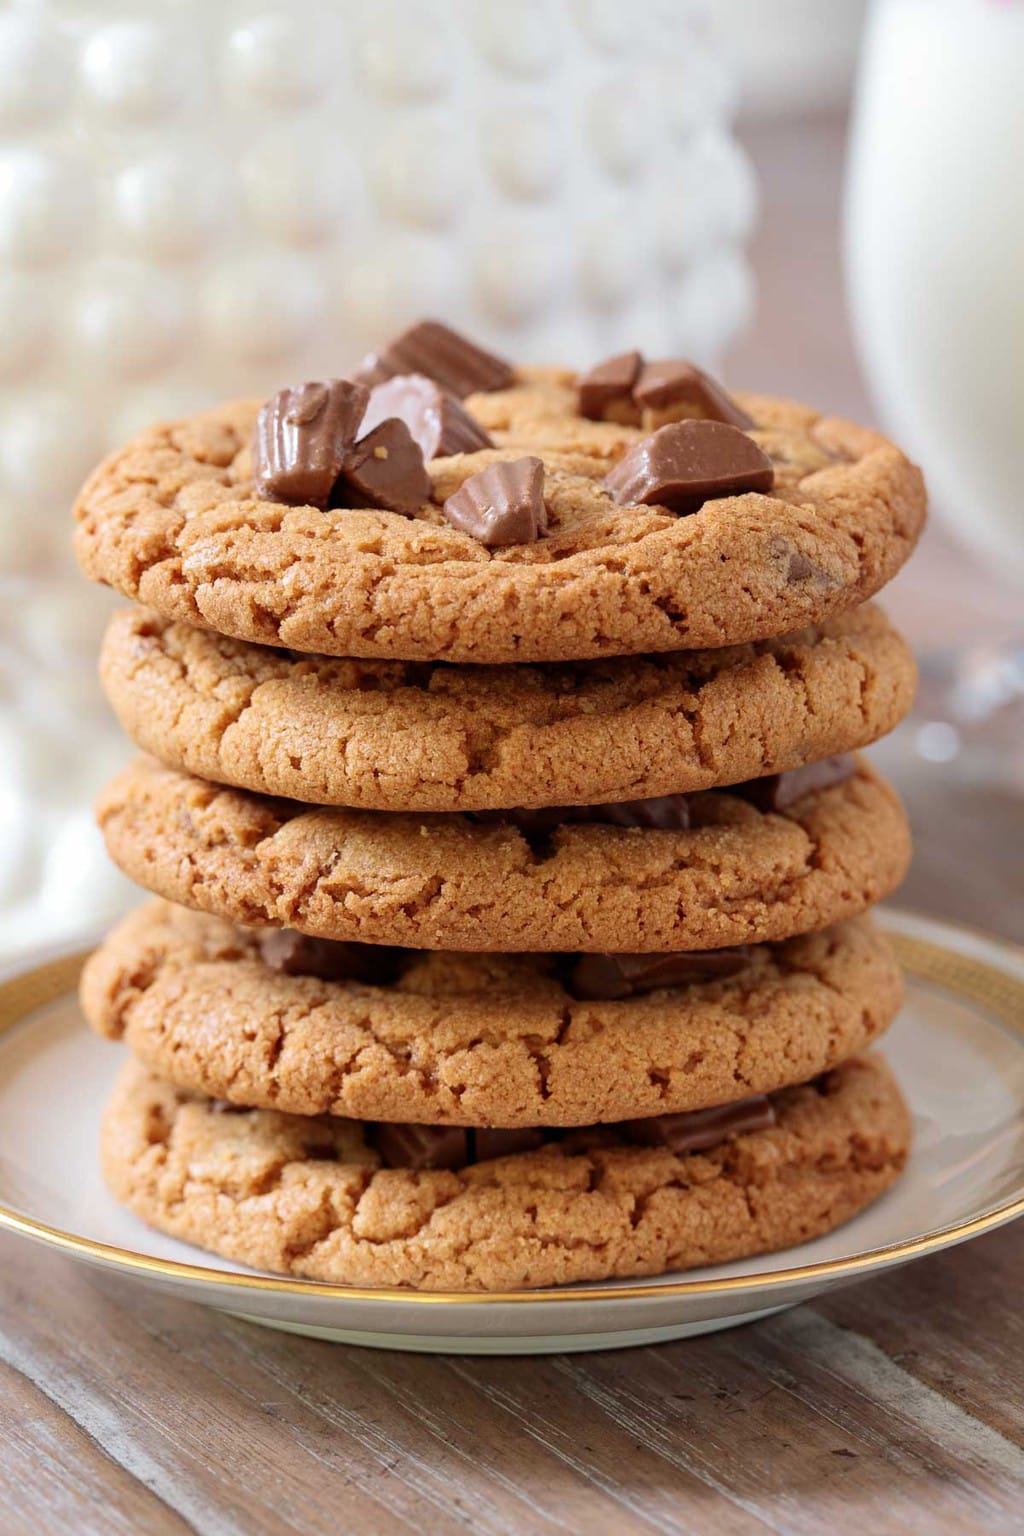 A vertical photo of a stack of One-Bowl Reese's Peanut Butter Cup Cookies.